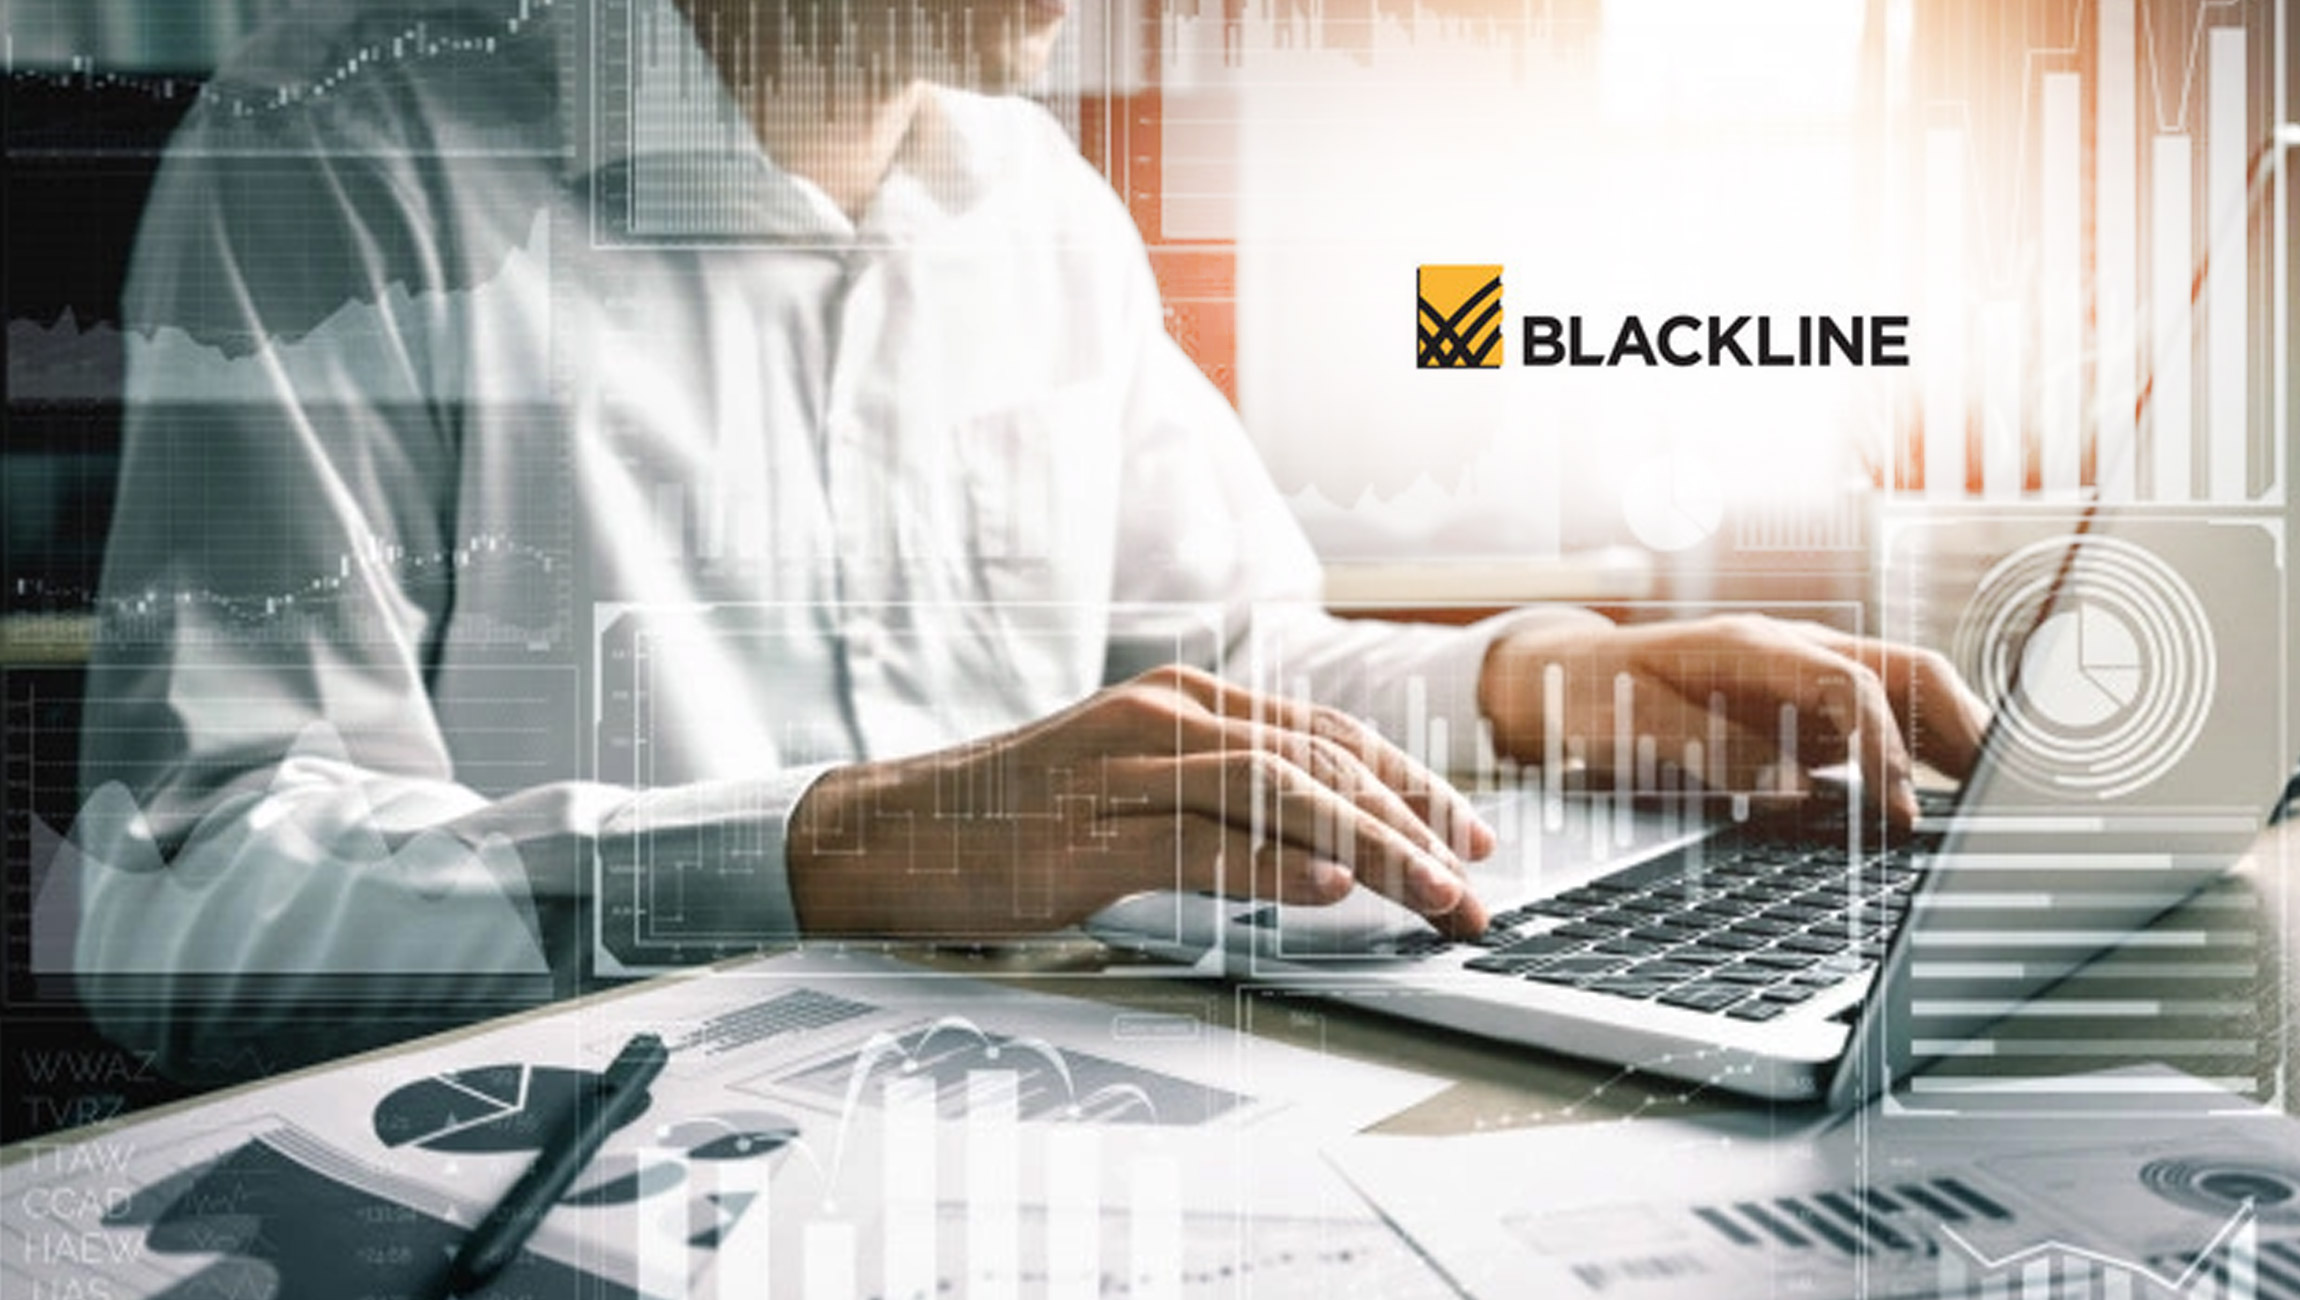 Oracle ERP Users Win Big With BlackLine, According To Nucleus Research